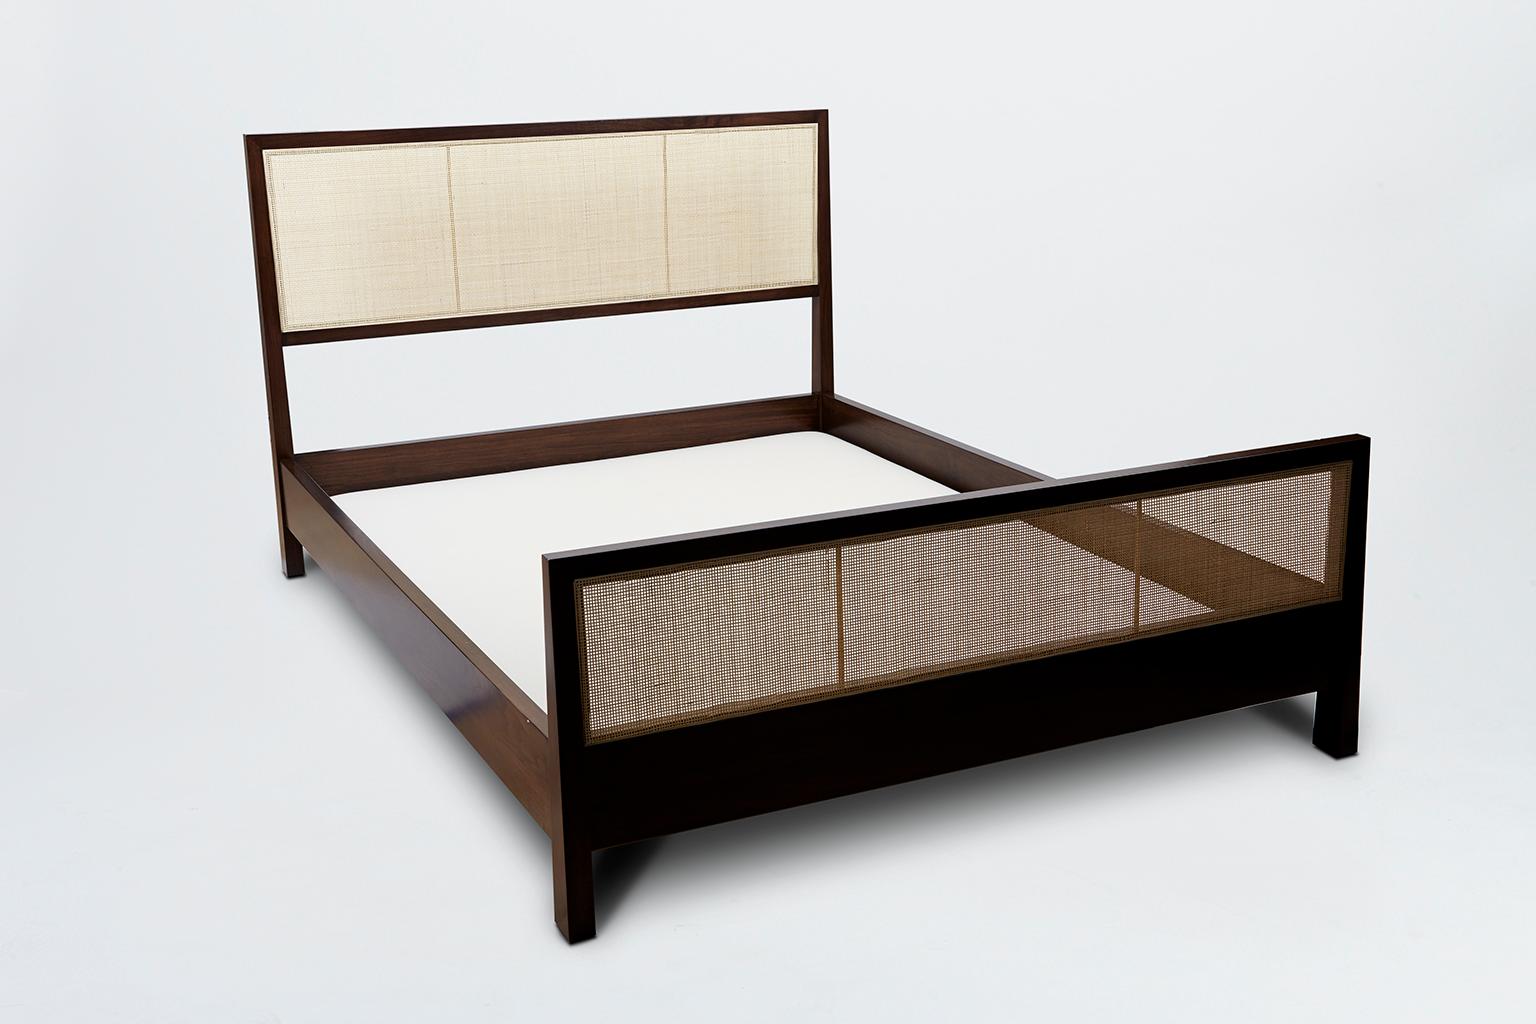 The caned bed is a solid wood framed bed that can be made in either white oak or American walnut. The piece features a headboard and footboard made with natural cane inset panels and brass stretchers. Slats are provided. Shown here in Dark Walnut.